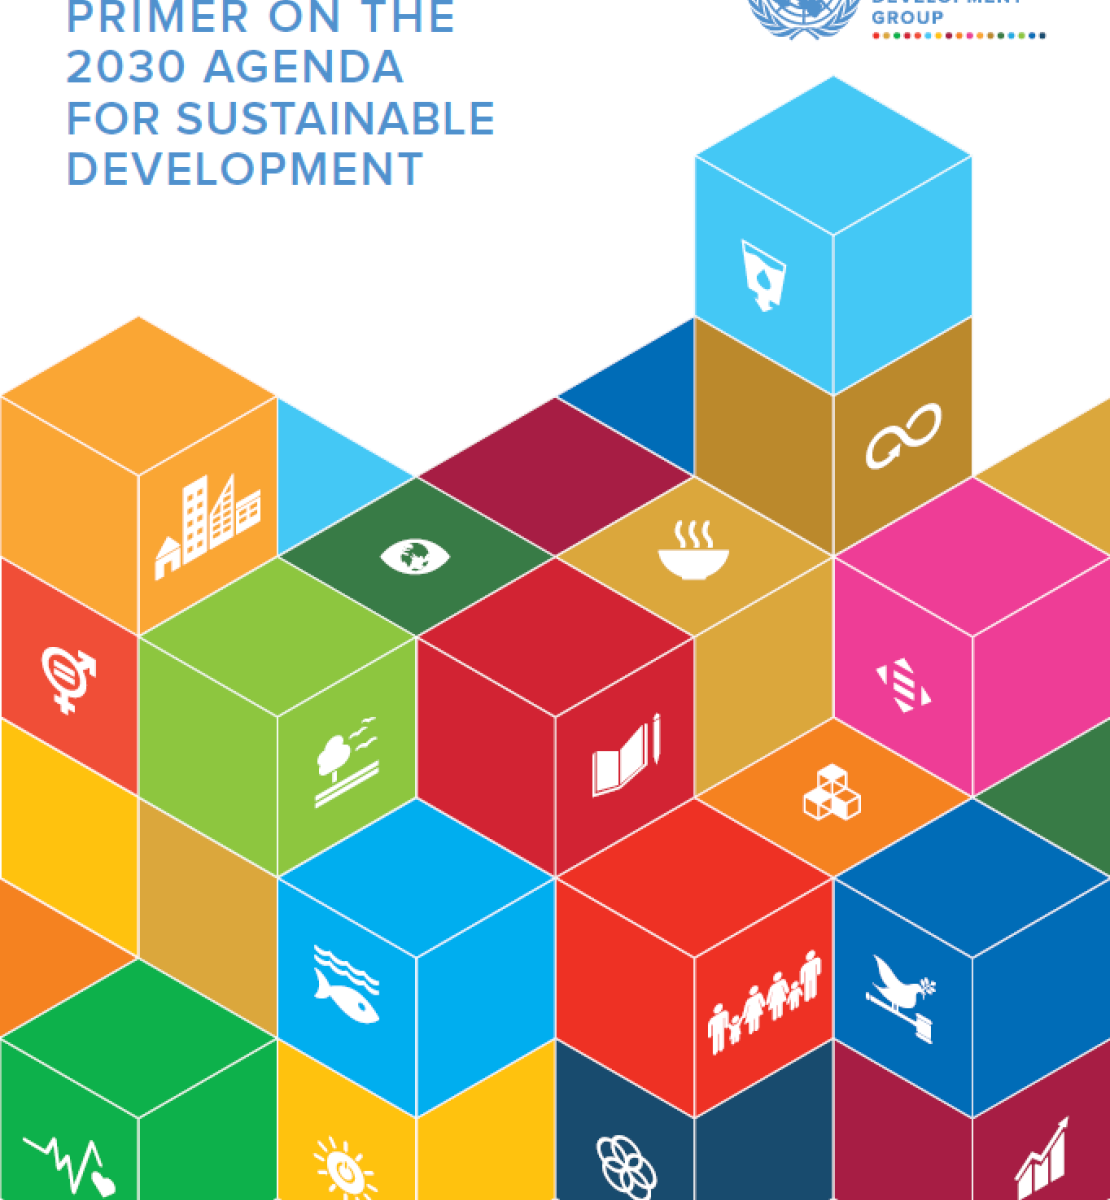 Cover shows title placed on the top left of the document, displayed above colourful SDG building blocks, several of which contain the SDG logos. 